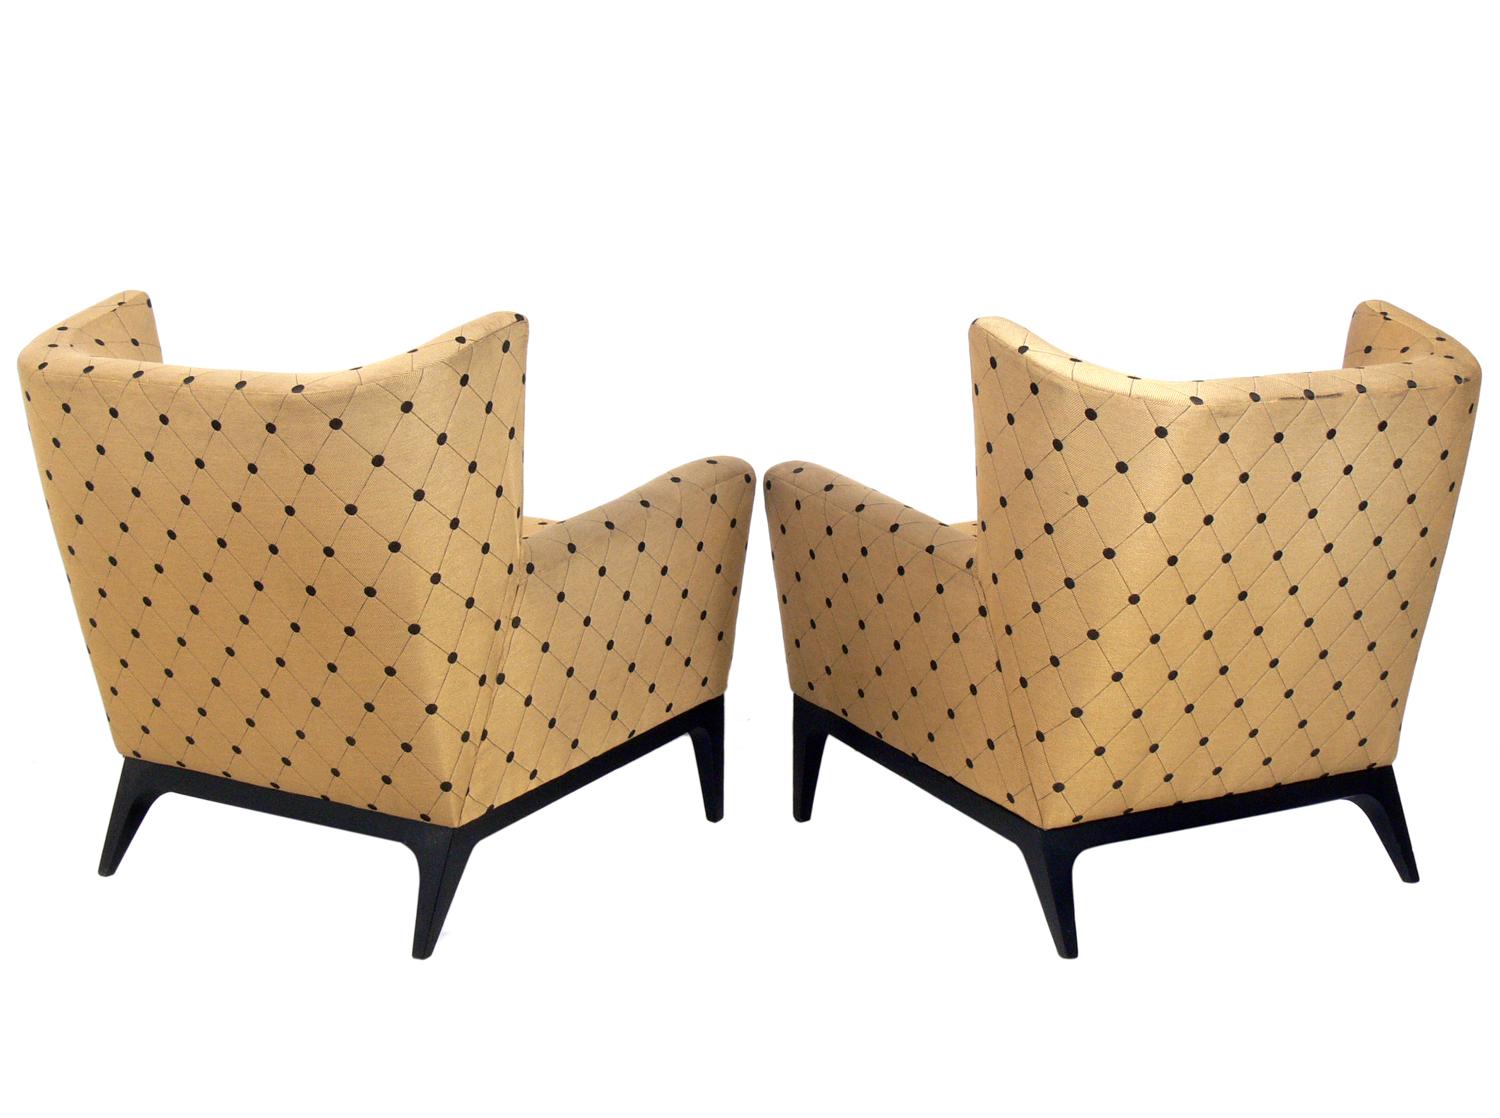 American Pair of Curvaceous Modern Lounge Chairs